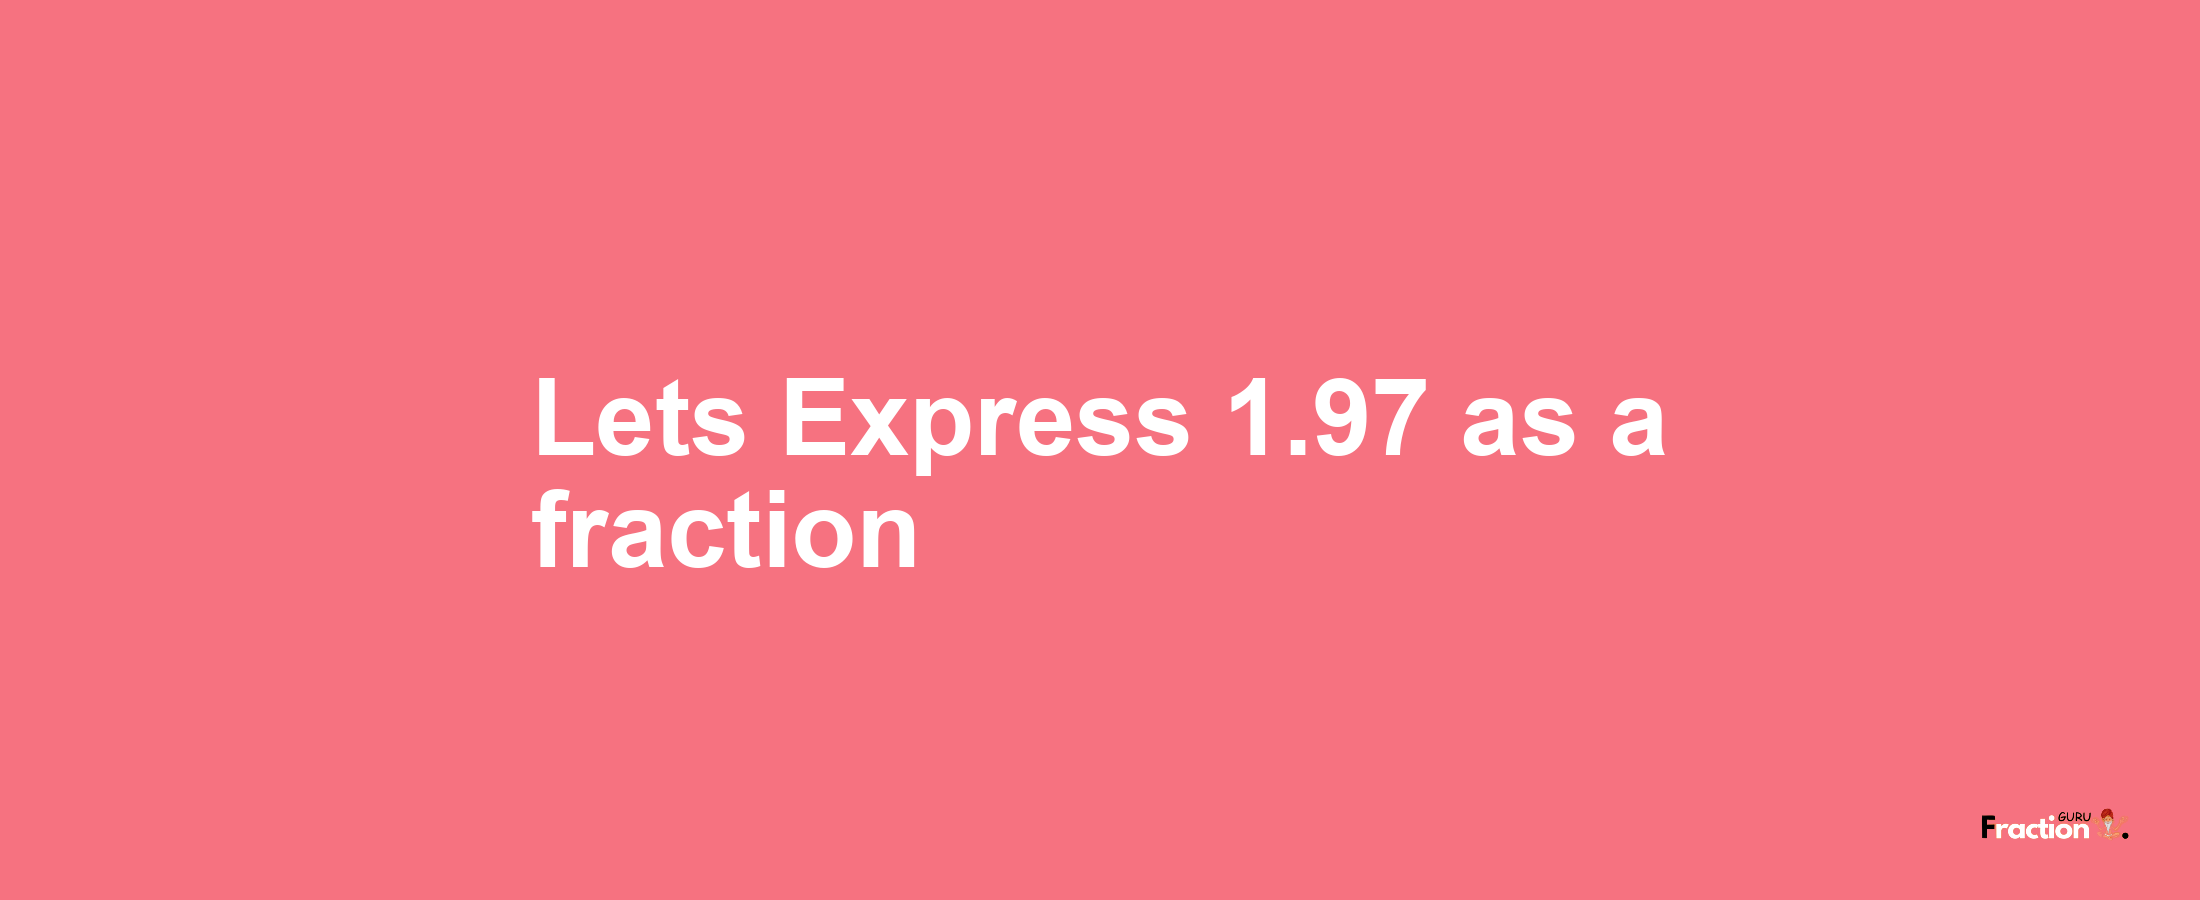 Lets Express 1.97 as afraction